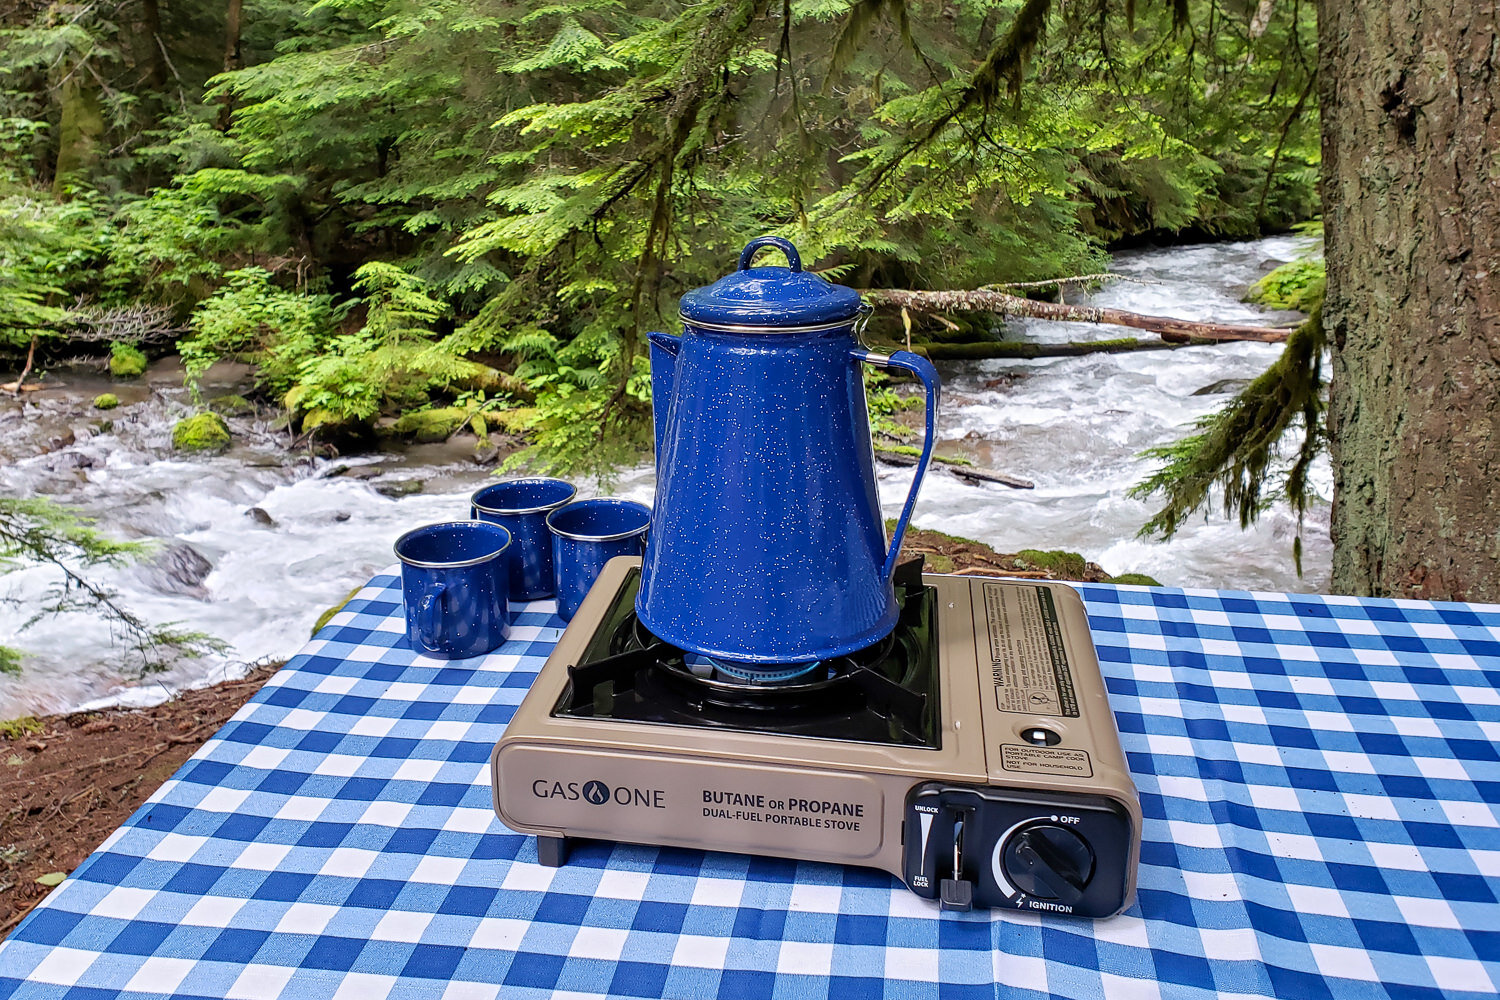 The Gas ONE GS-1000 is a great budget buy for hot water, coffee, and light camp cooking